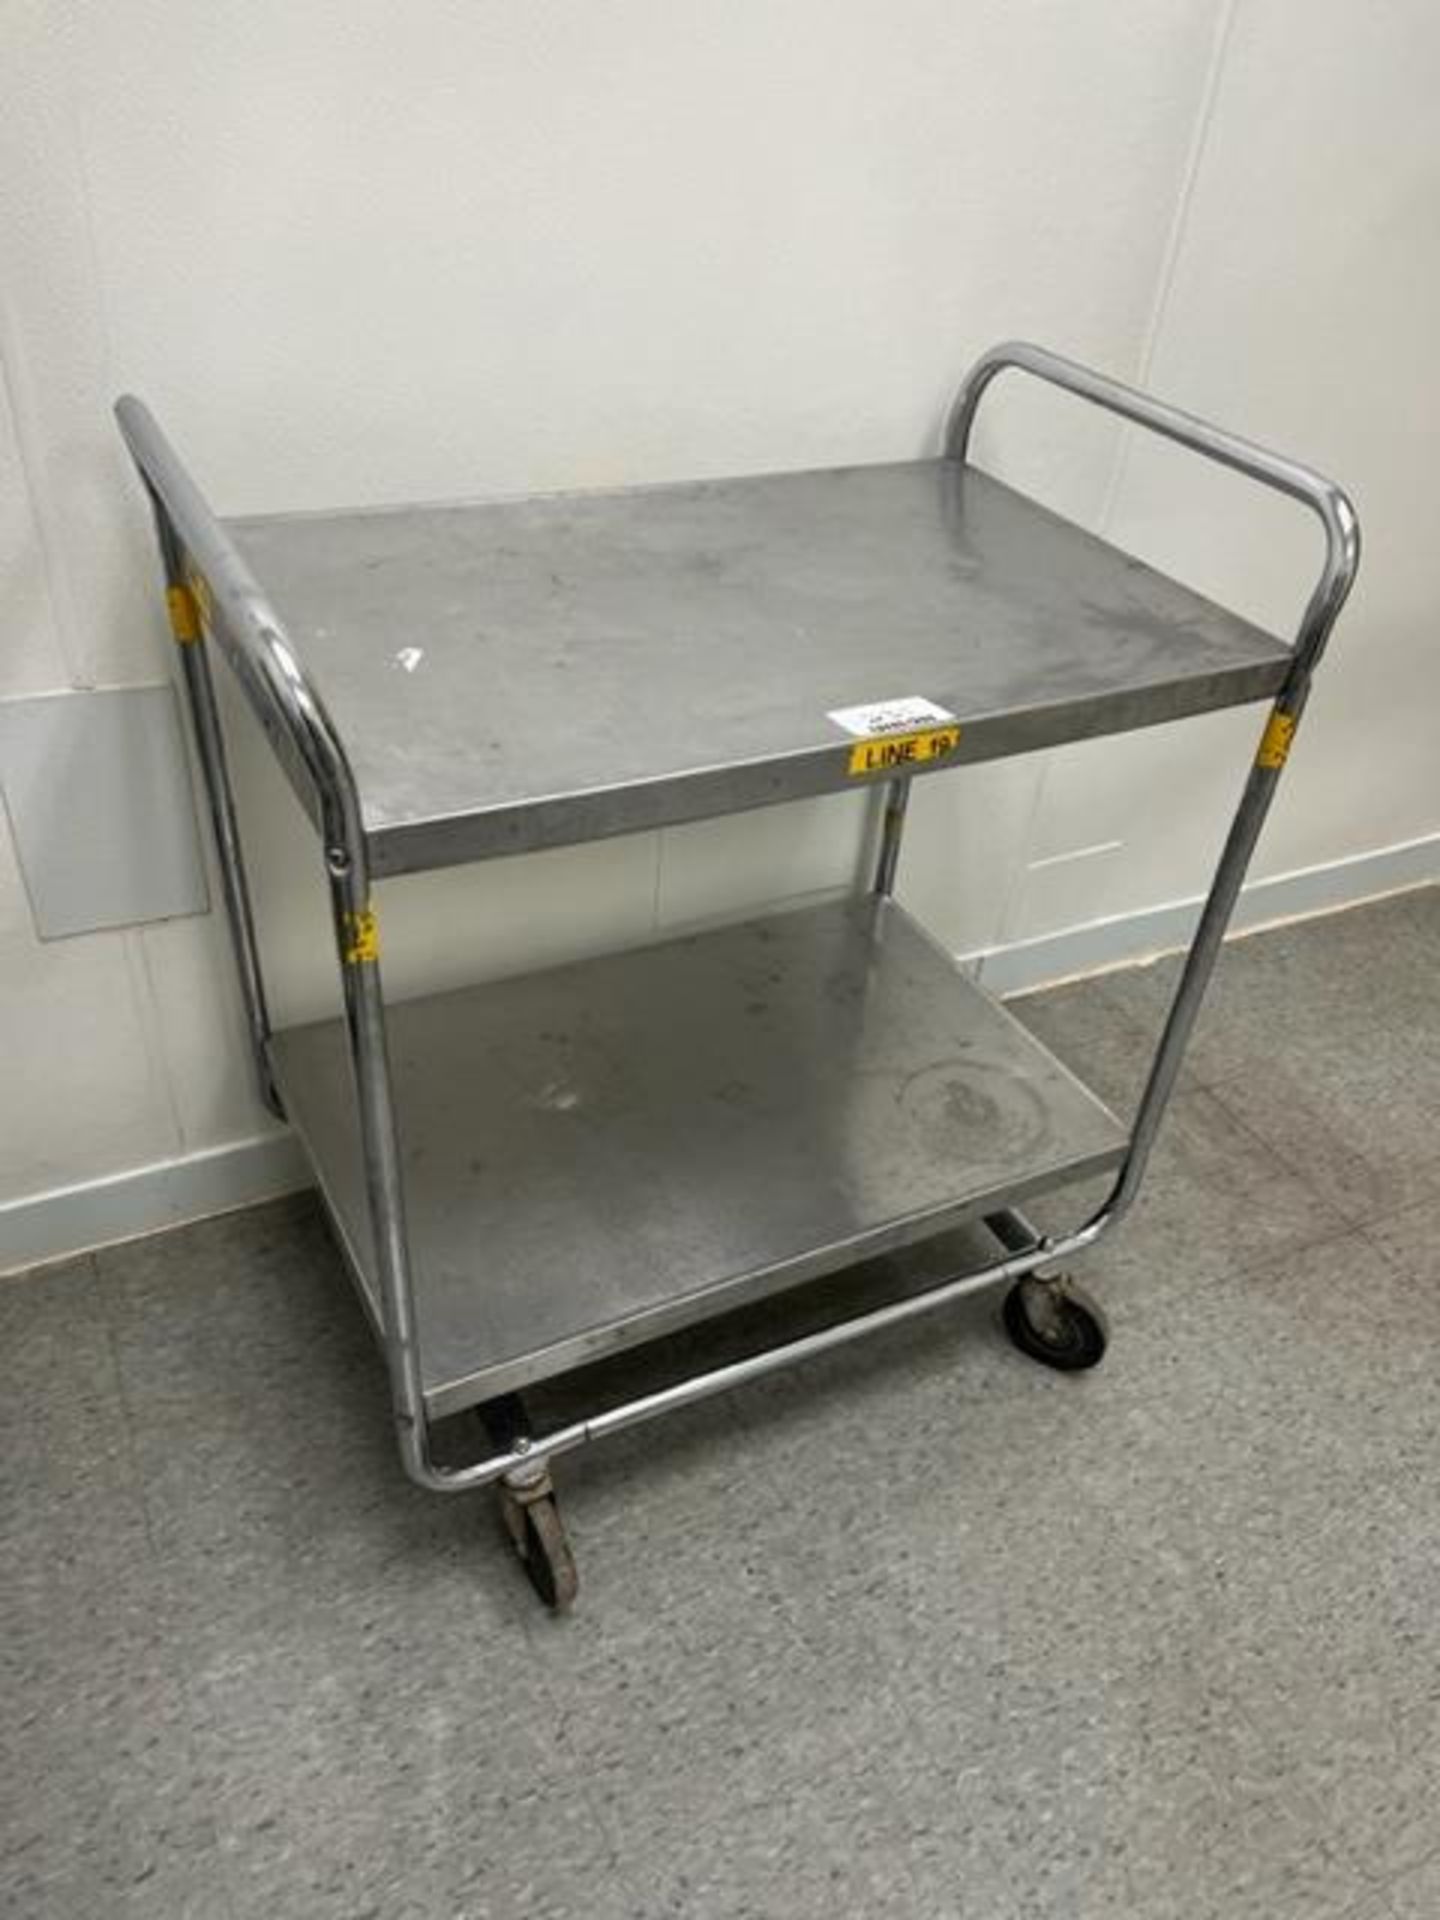 Asset 231 - Stainless steel cart 21" x 34". $345.00 Rigged and packed on 48" x 40" pallet banded and